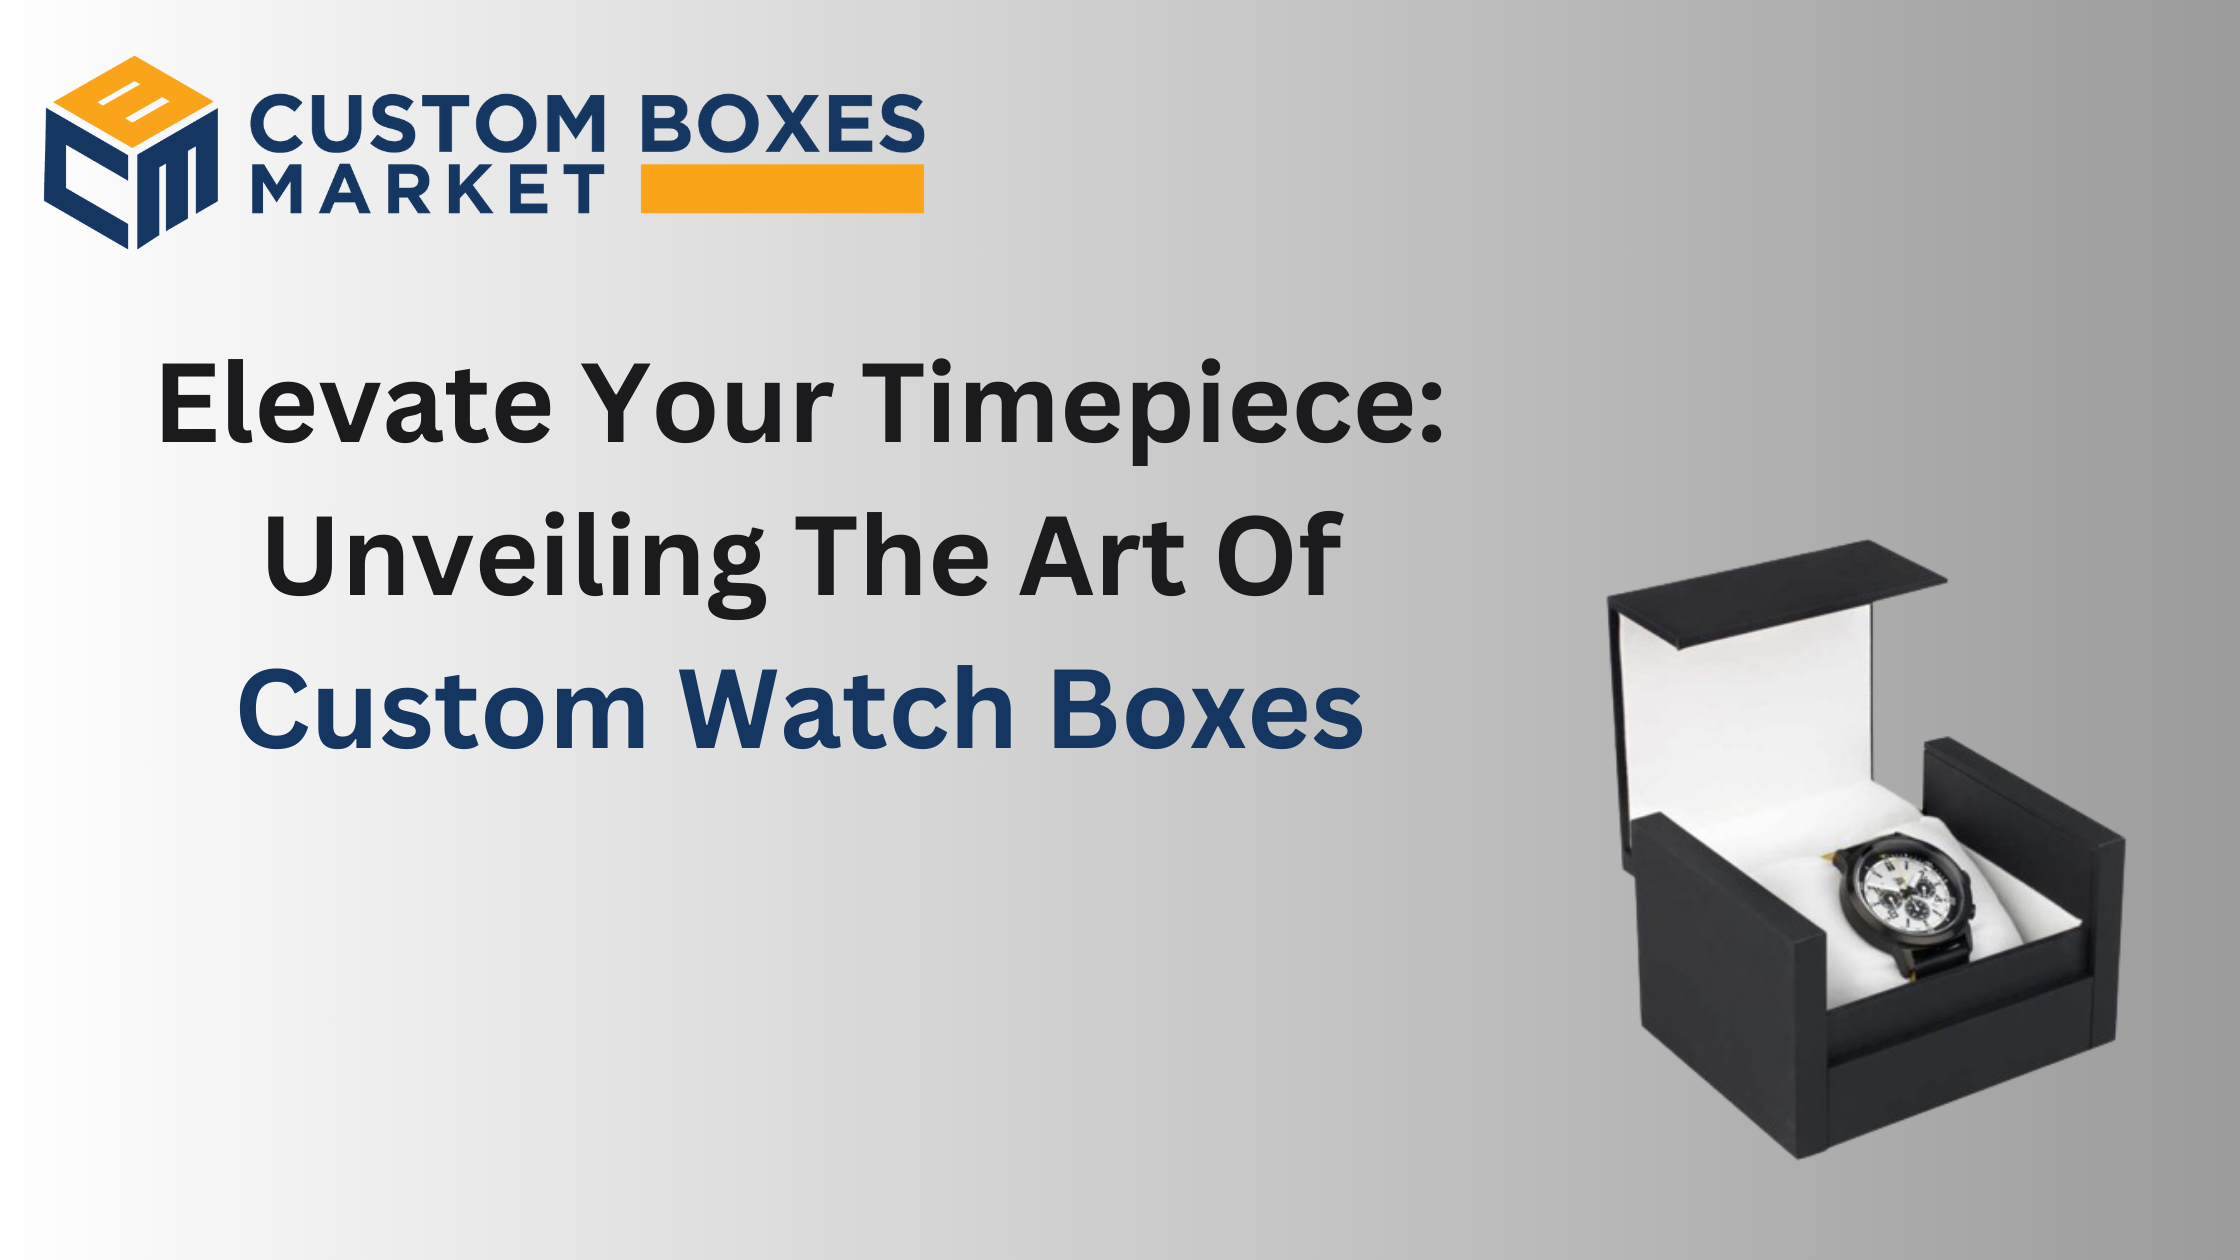 Elevate Your Timepiece: Unveiling The Art Of Custom Watch Boxes